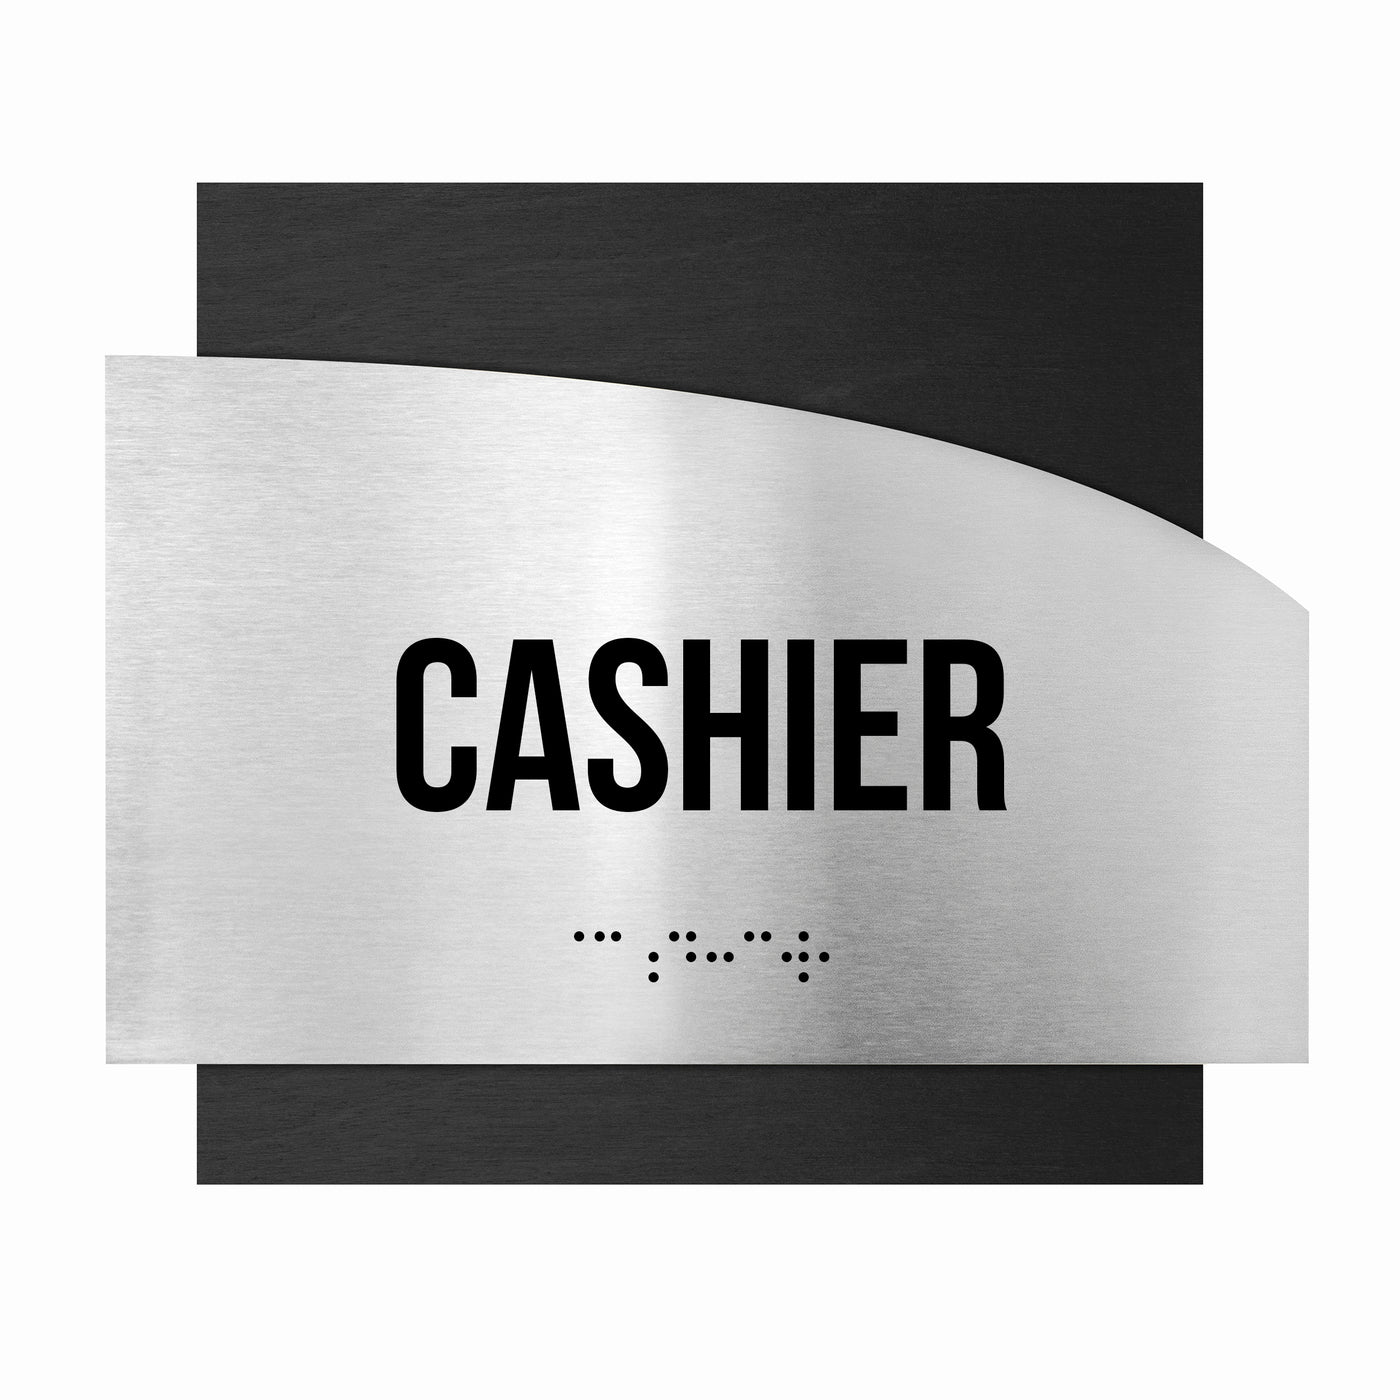 Door Signs - Cashier Signs - Stainless Steel & Wood Plate - "Wave" Design